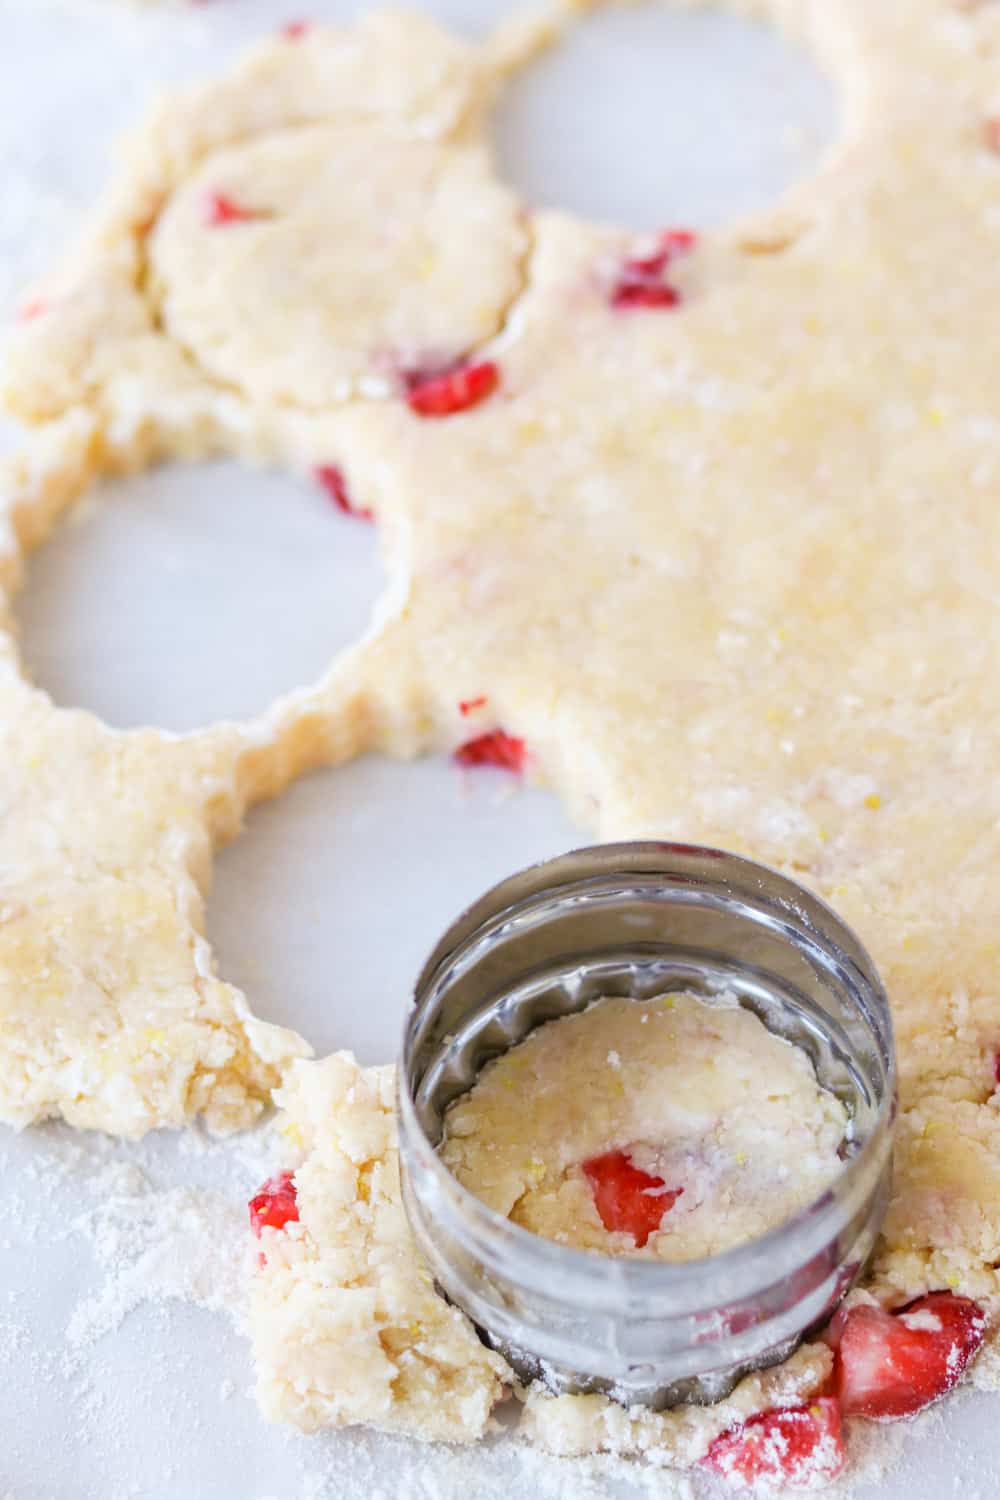 Cutting out scones with strawberries.